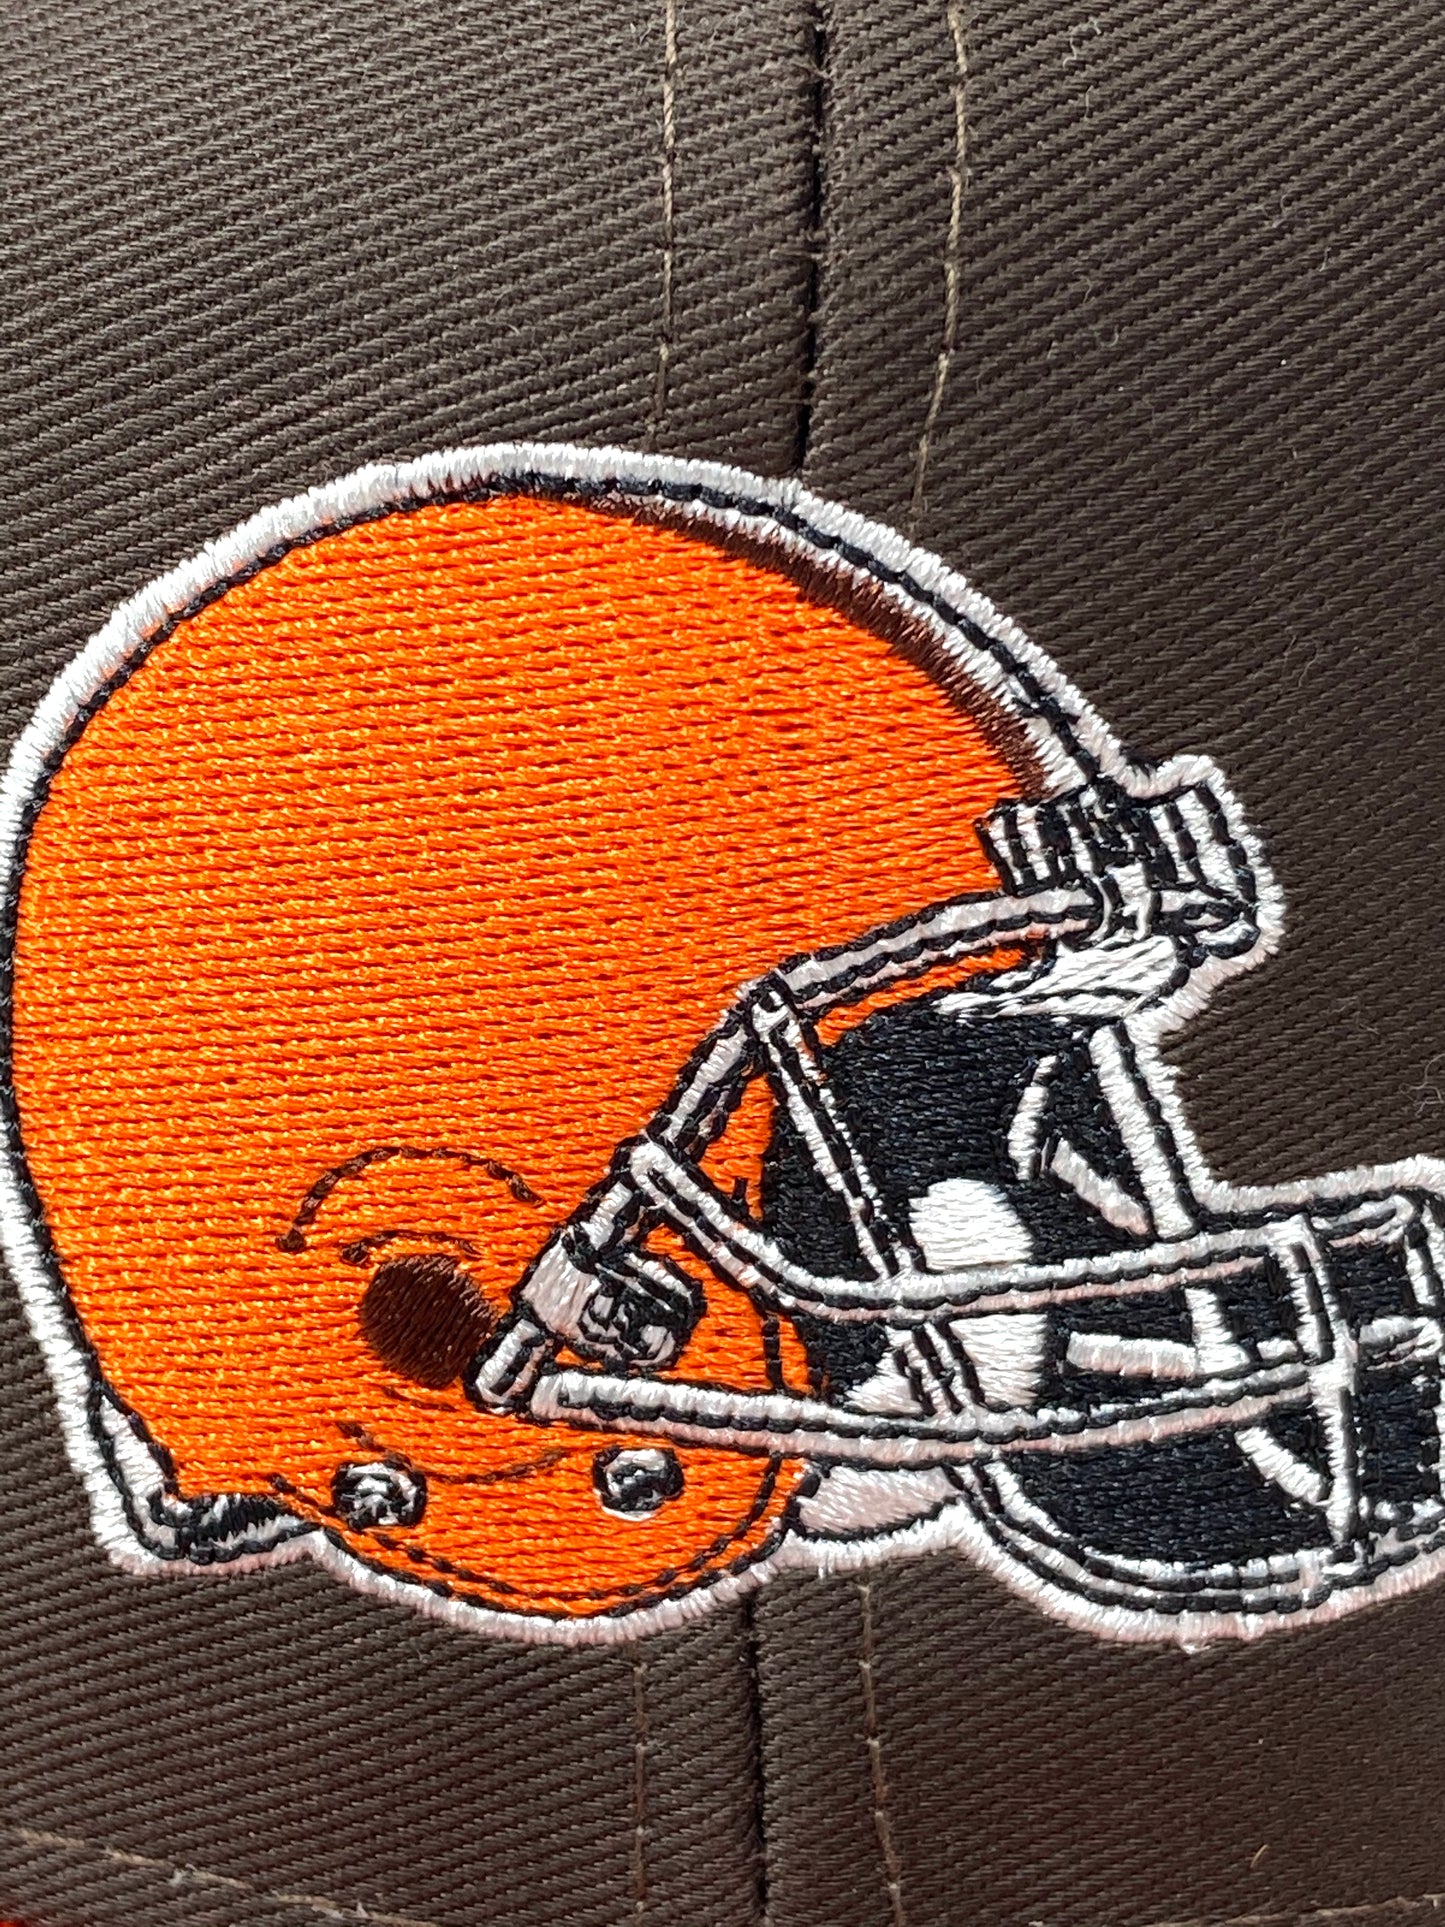 Cleveland Browns Vintage NFL Embroidered Replica Snapback by Logo Athletic